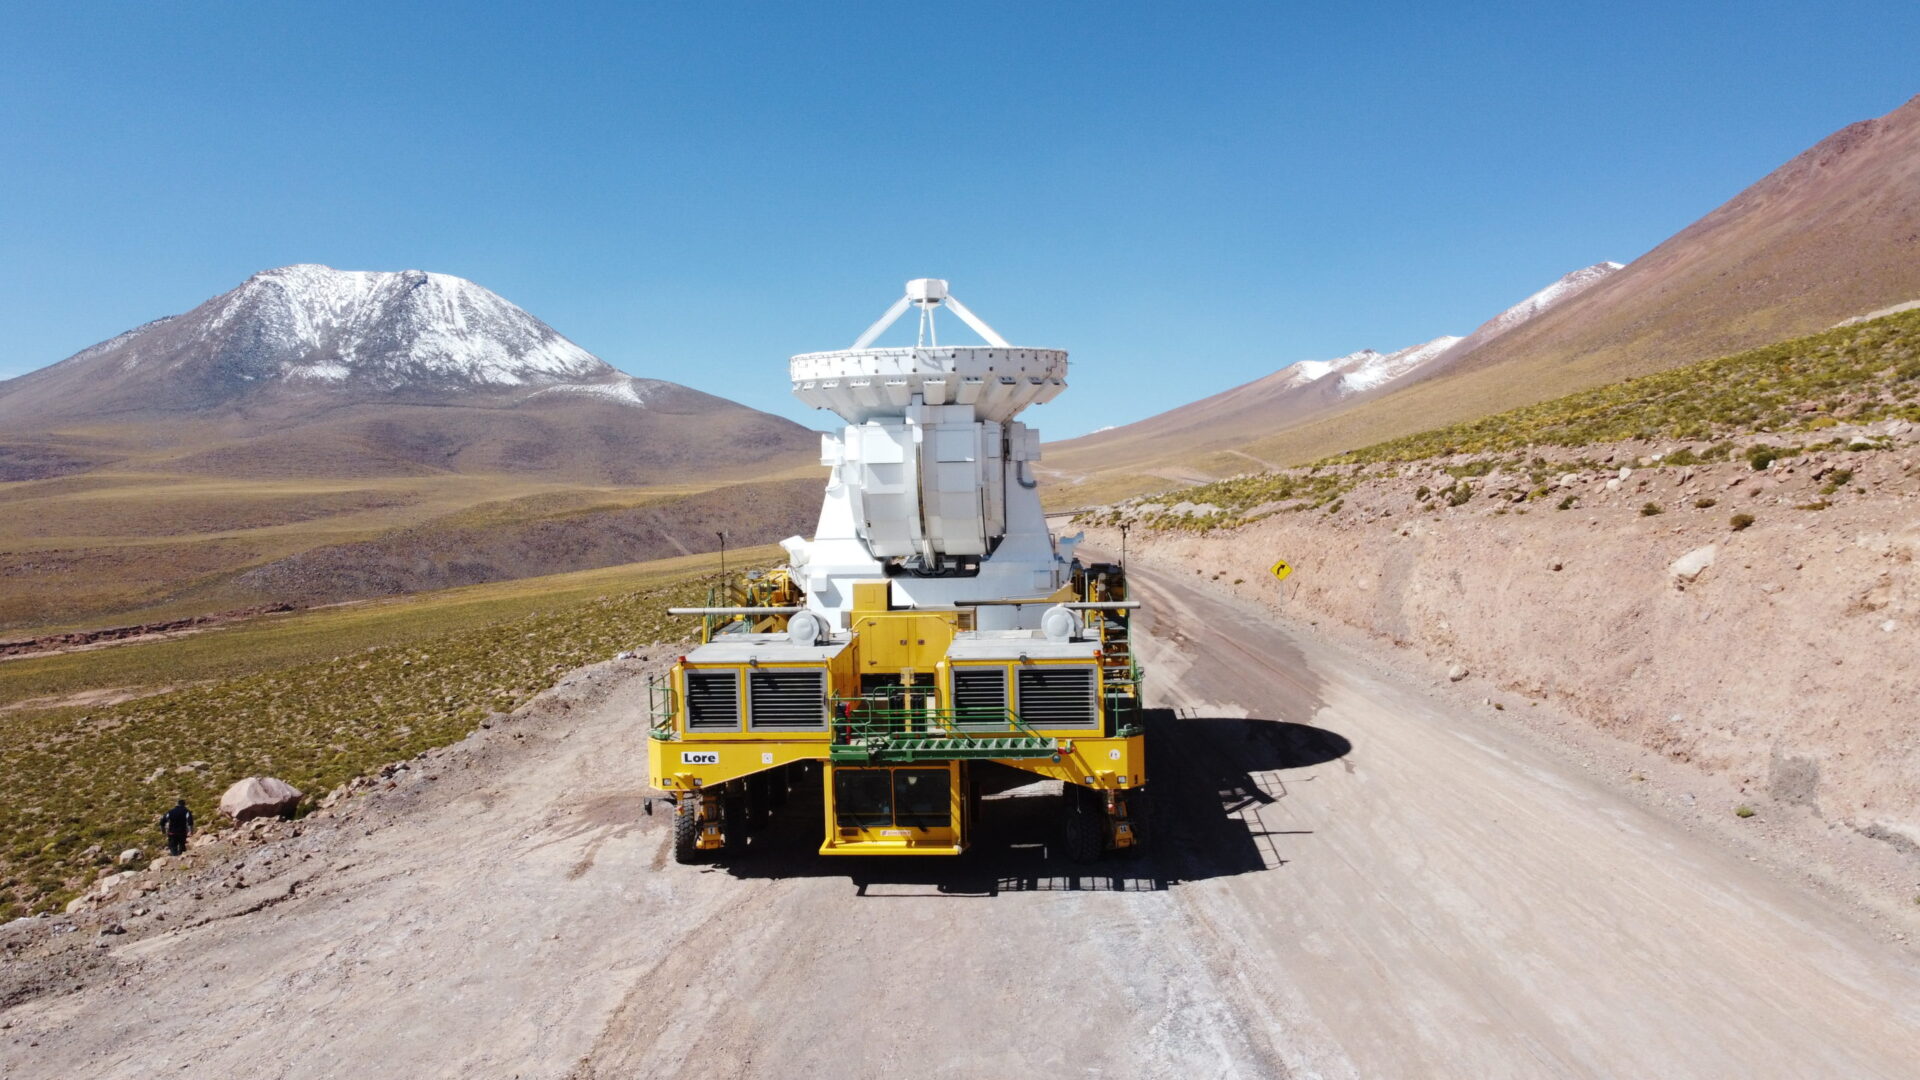 <p>Transporter Lore,  takes the CM04 antenna to the Chajnantor plateau after completing its scheduled maintenance. Credit: Juan Carlos Rojas - ALMA (ESO/NAOJ/NRAO)</p>
